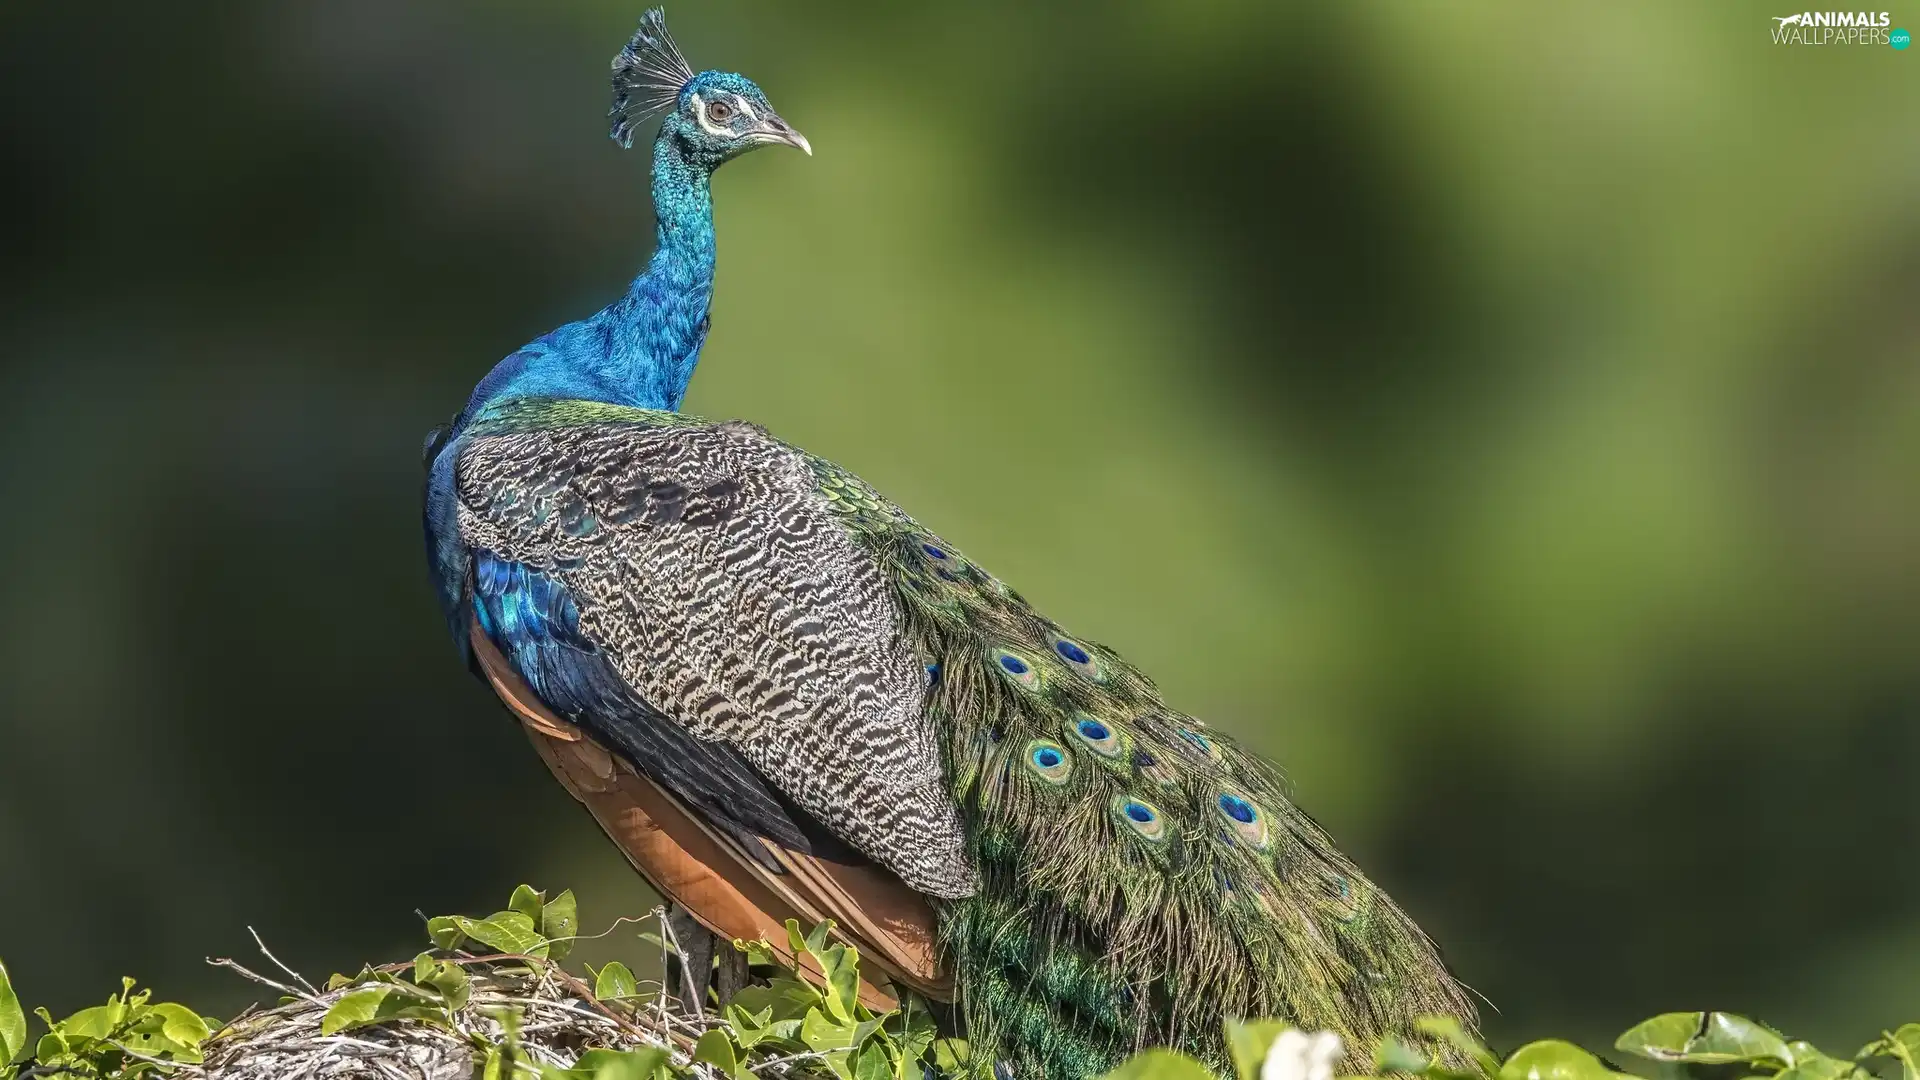 Indian Peacock, tail